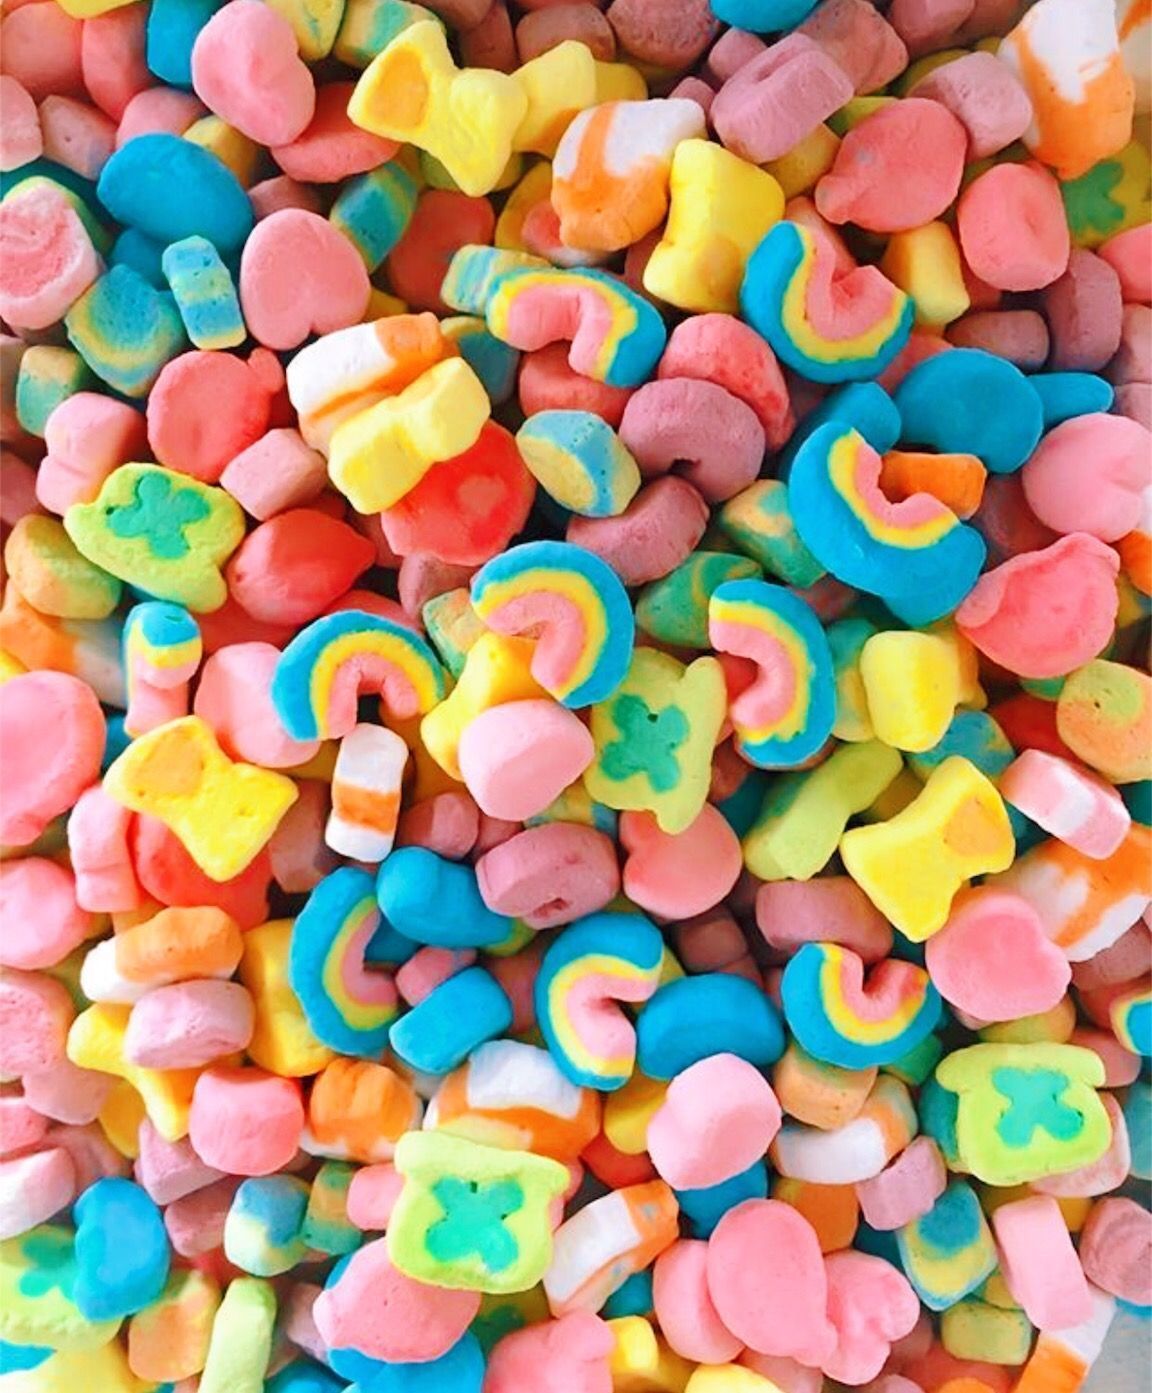 Candy Aesthetic Wallpaper Free Candy Aesthetic Background